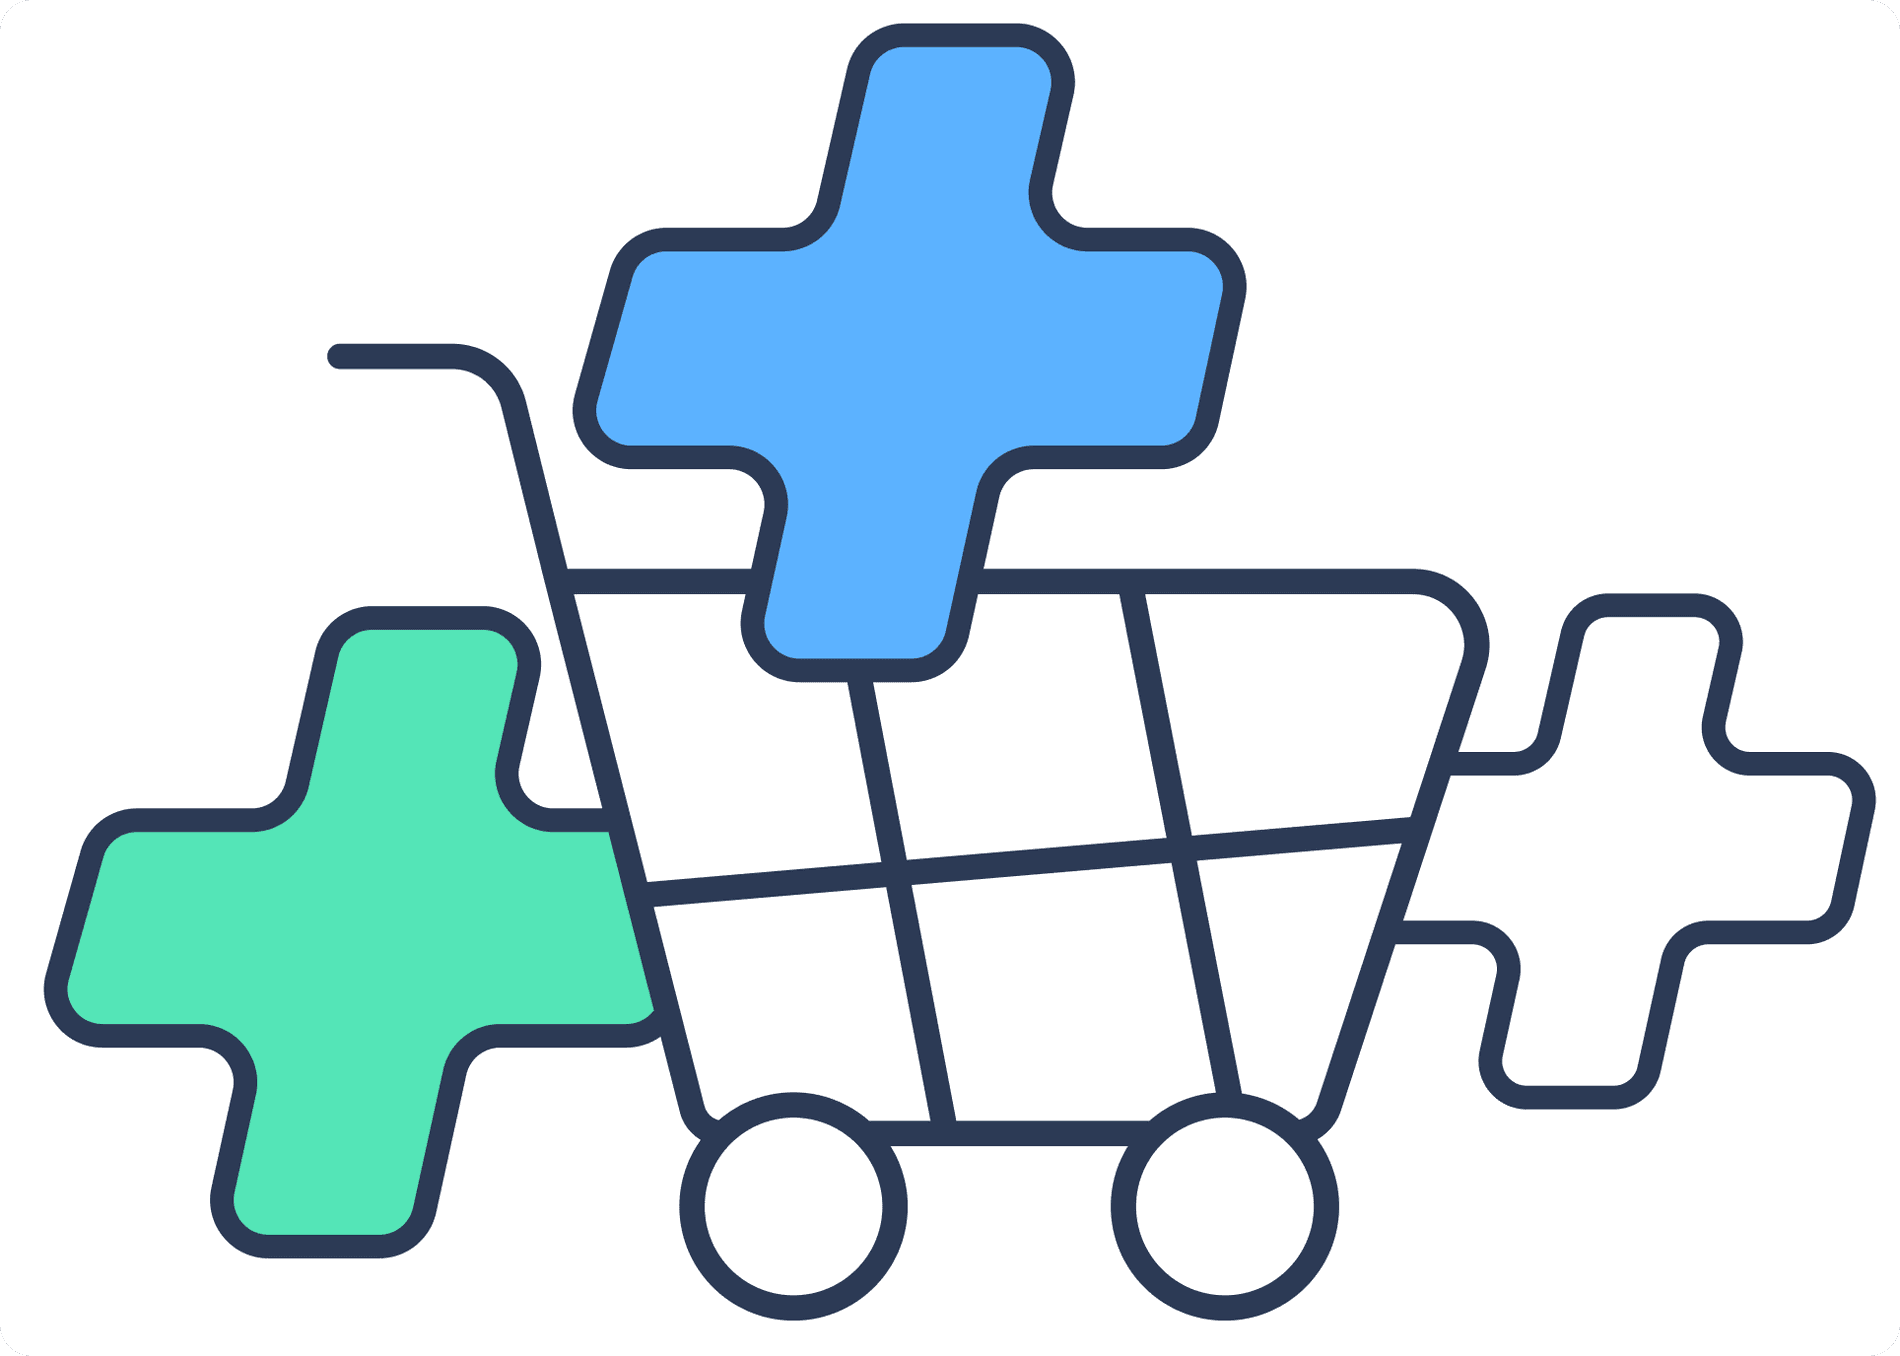 Boost your eCommerce sales and save resources